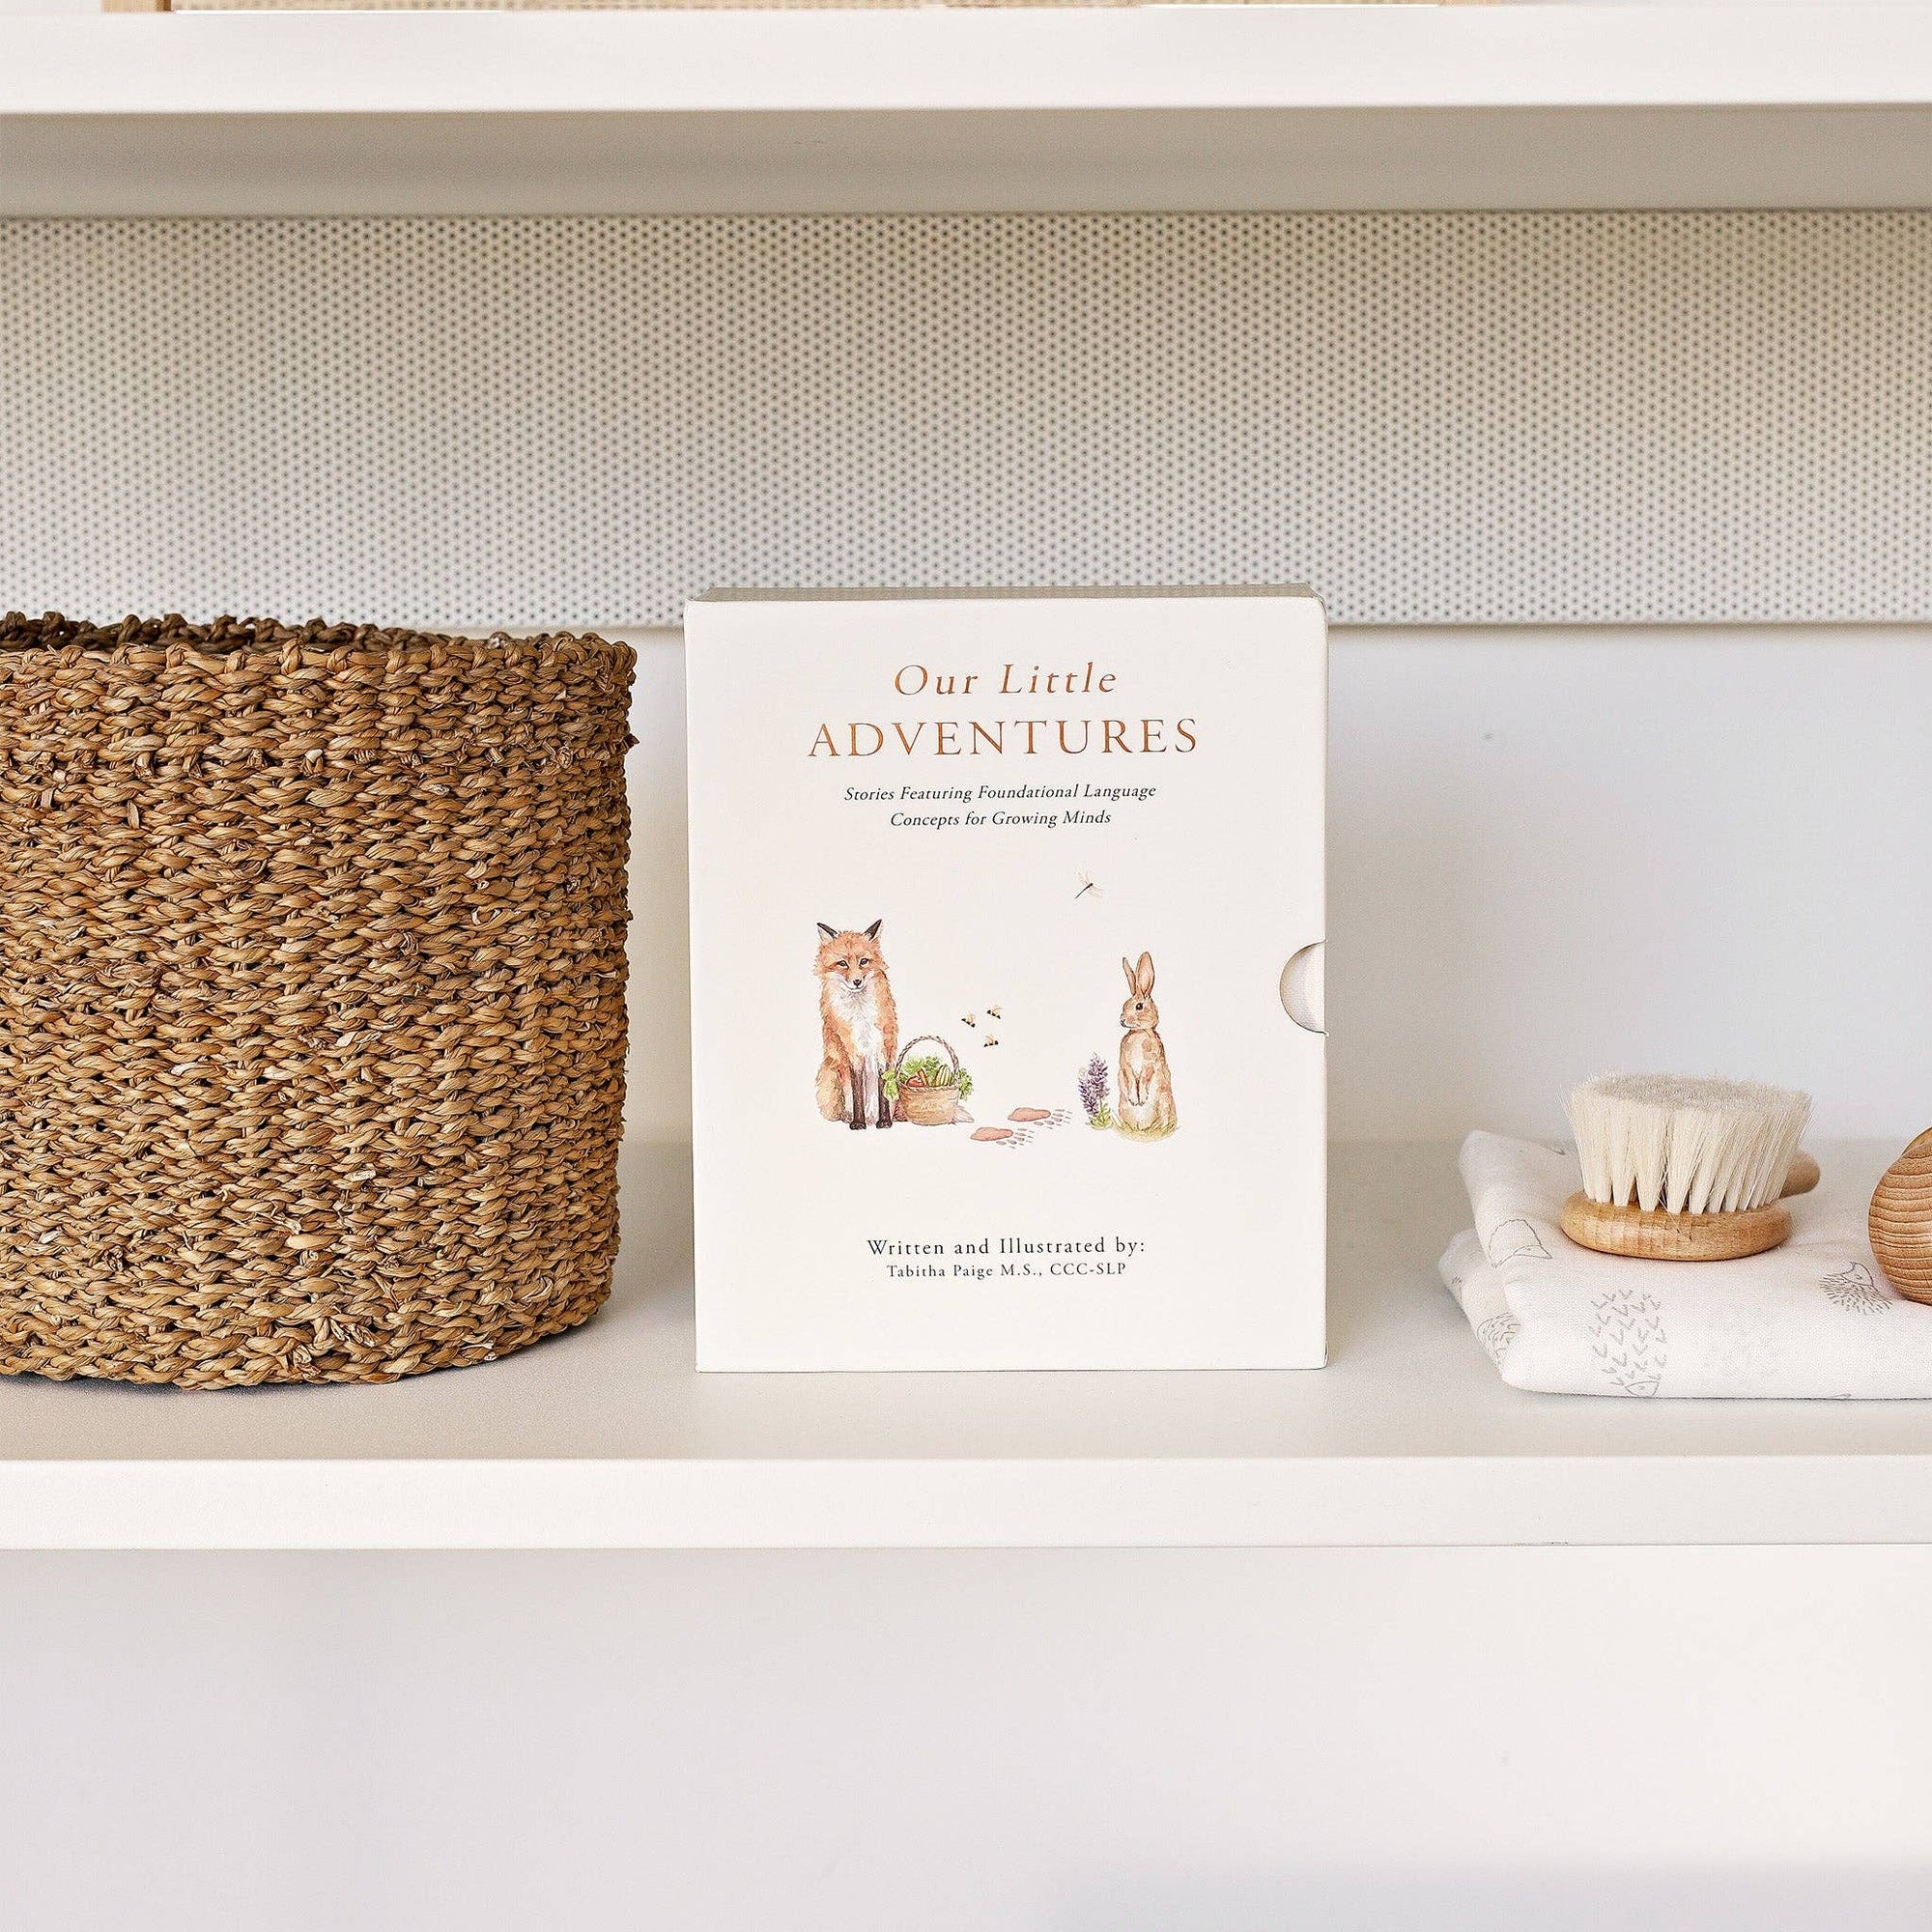 Our Little Adventures Box Set on language development and nature adventures, displayed on a shelf next to a basket.